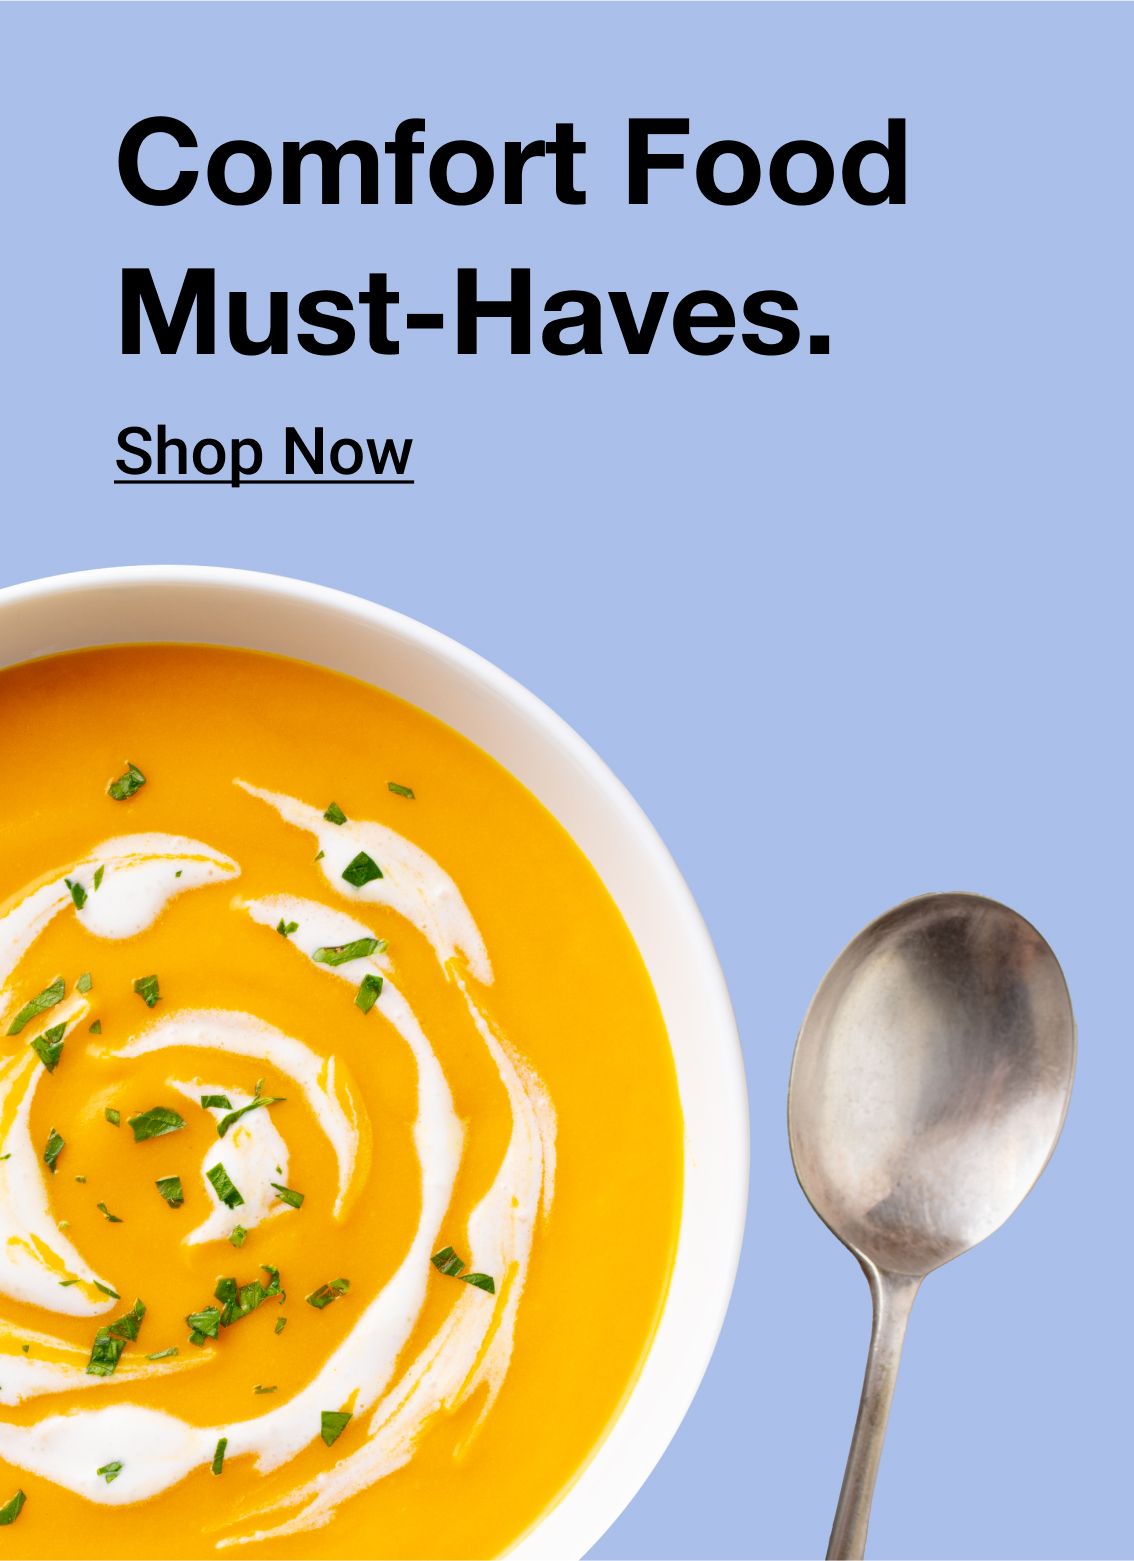 Comfort foods must-haves. Click to shop now